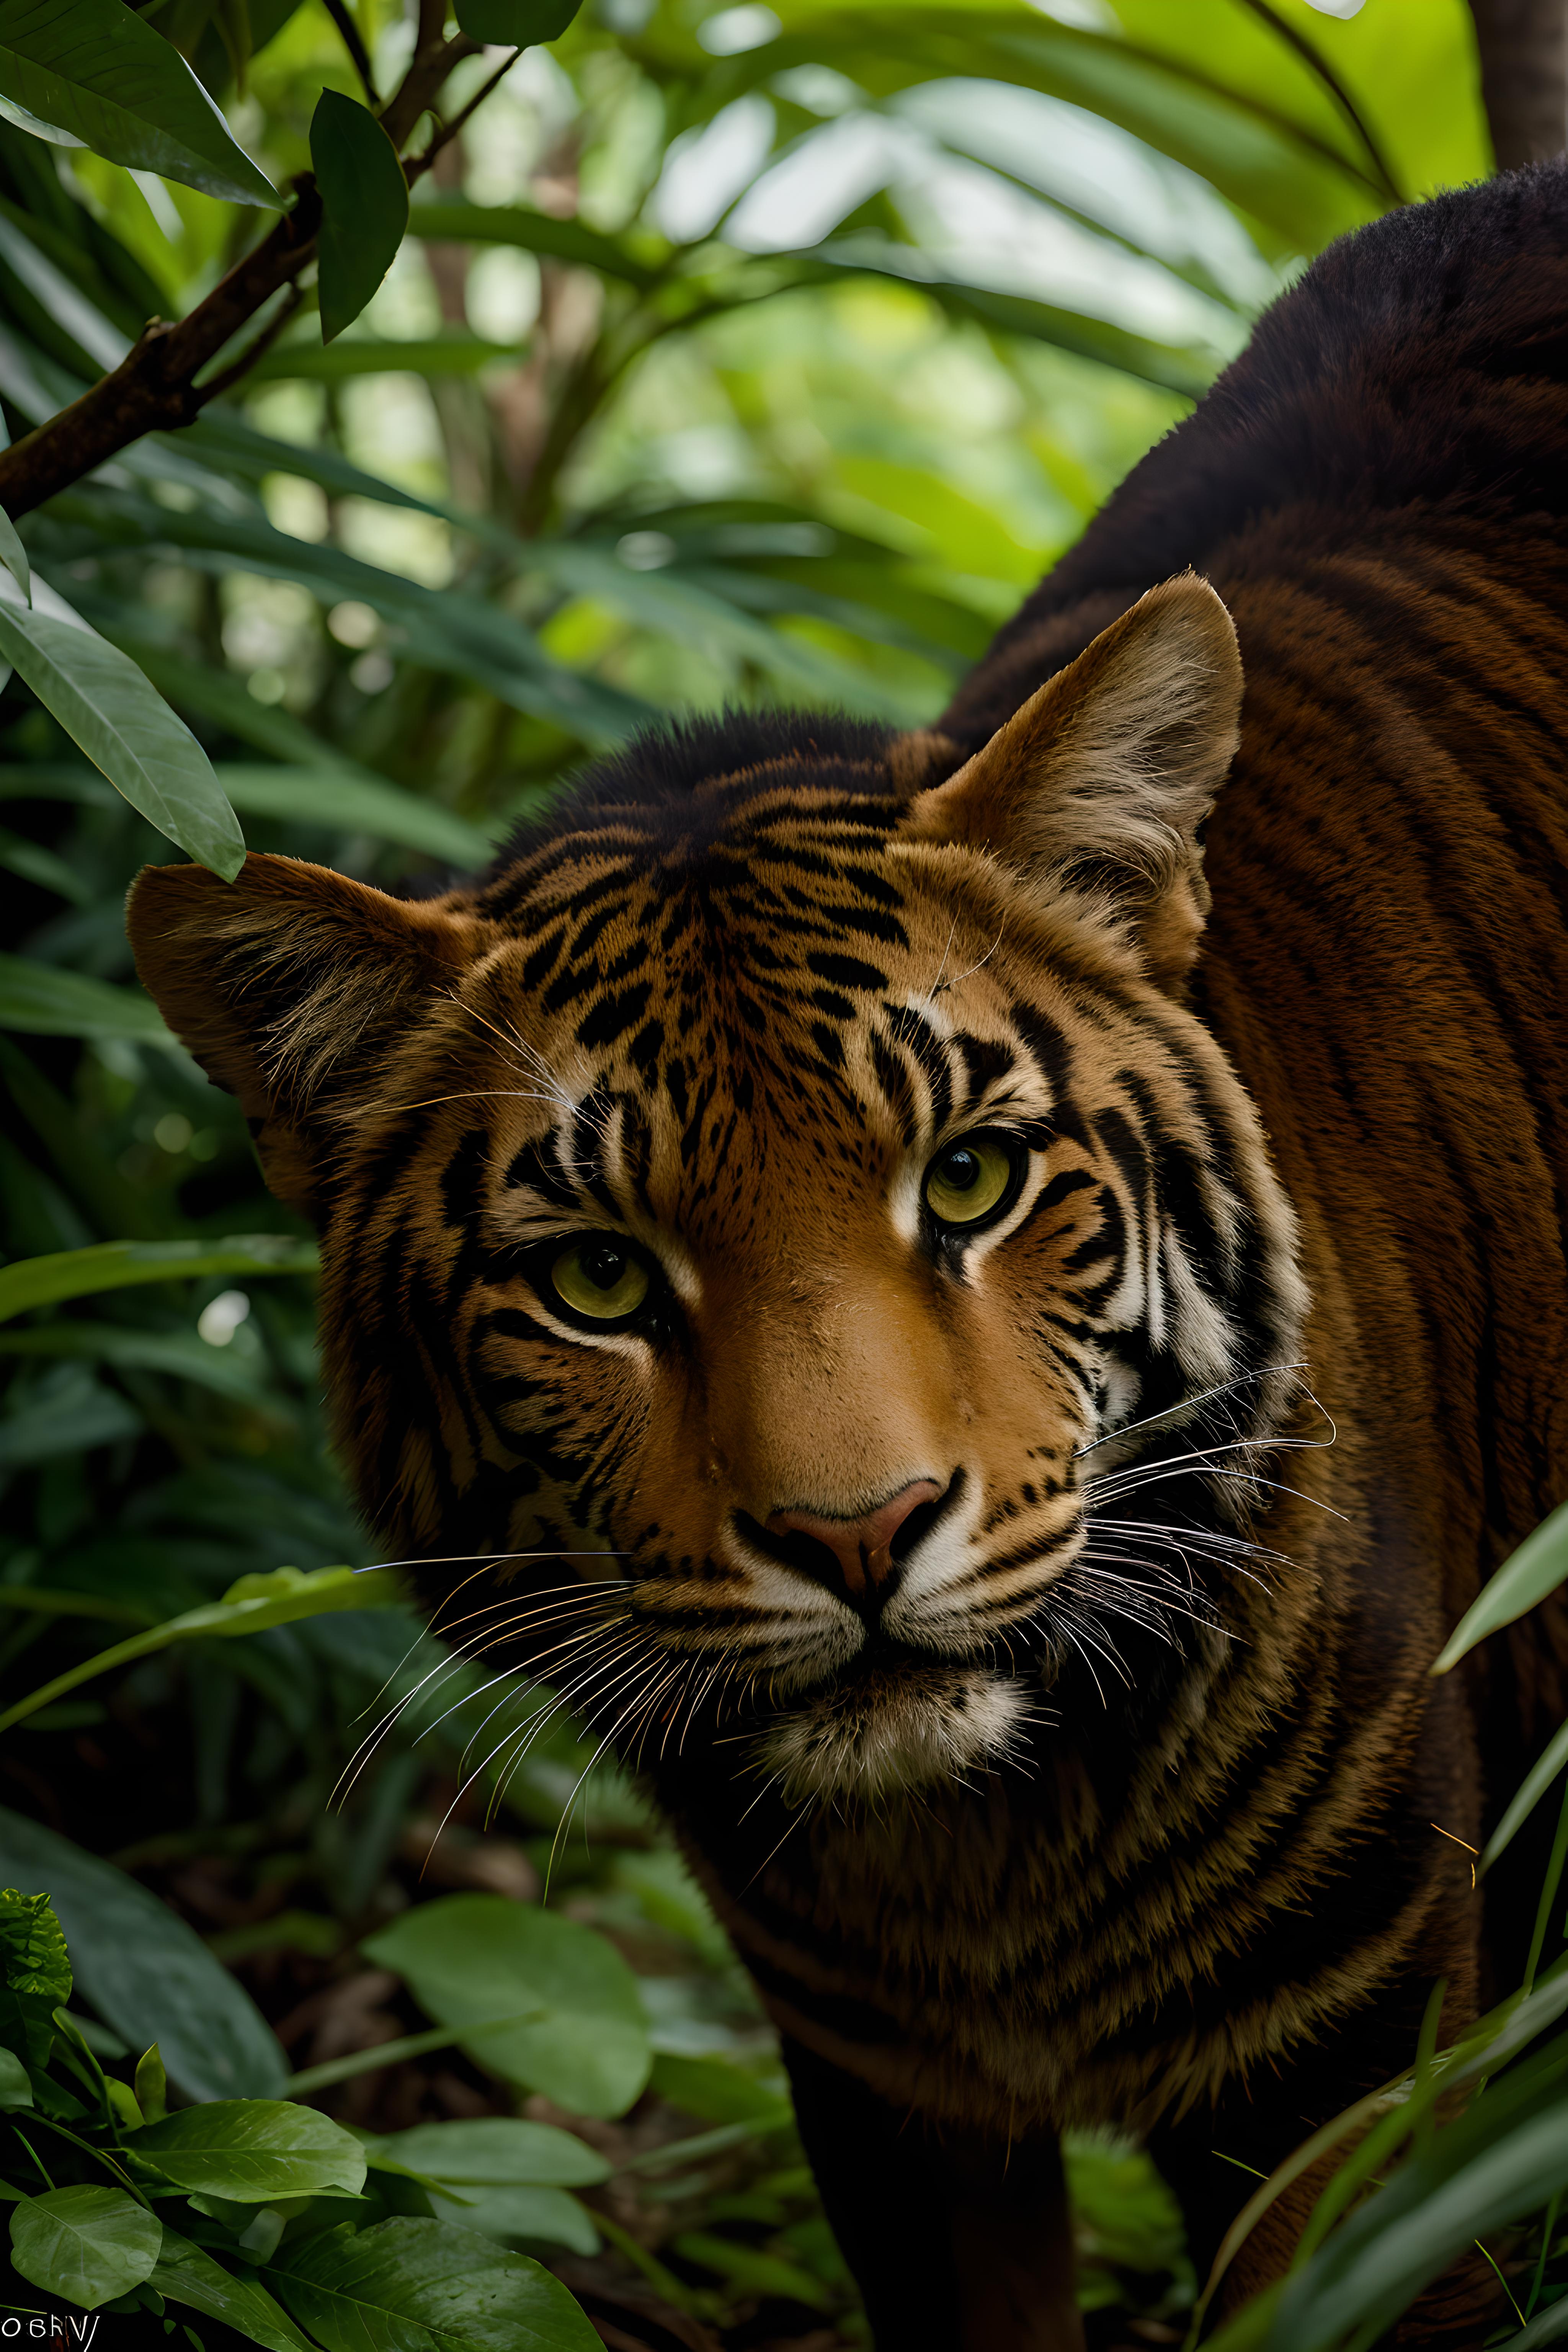 A close-up of a tiger's face with green eyes and a black nose.